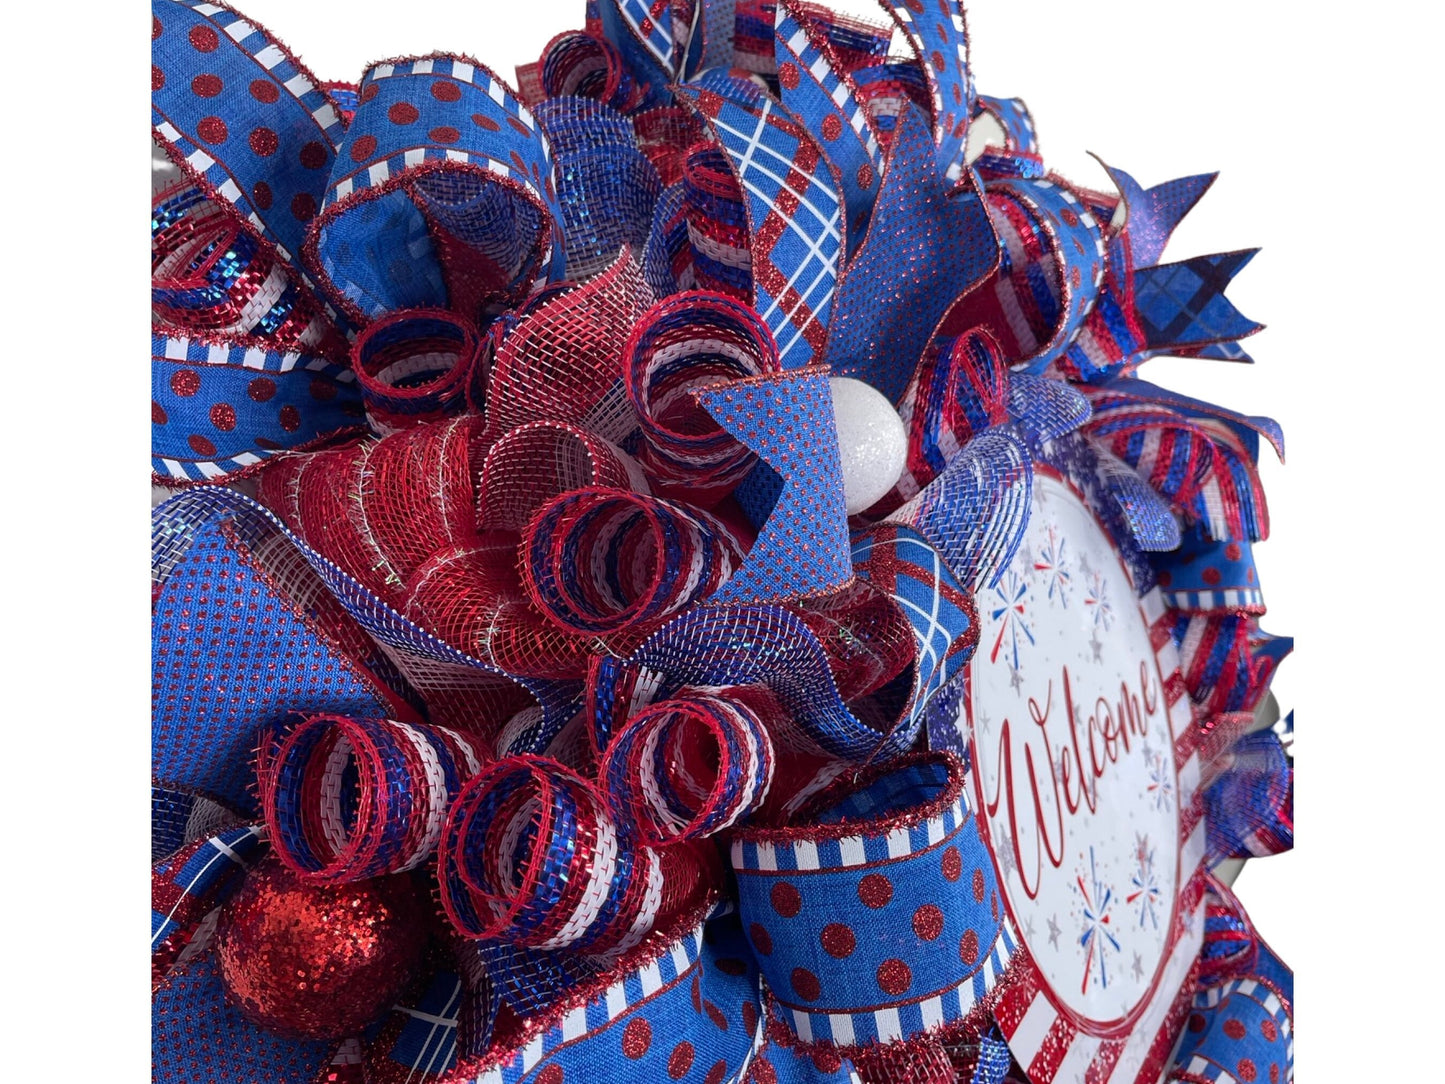 star spangled banner 4th of July patriotic wreath, stars and stripes independence day wreath for font door, patriotic mantle wreath